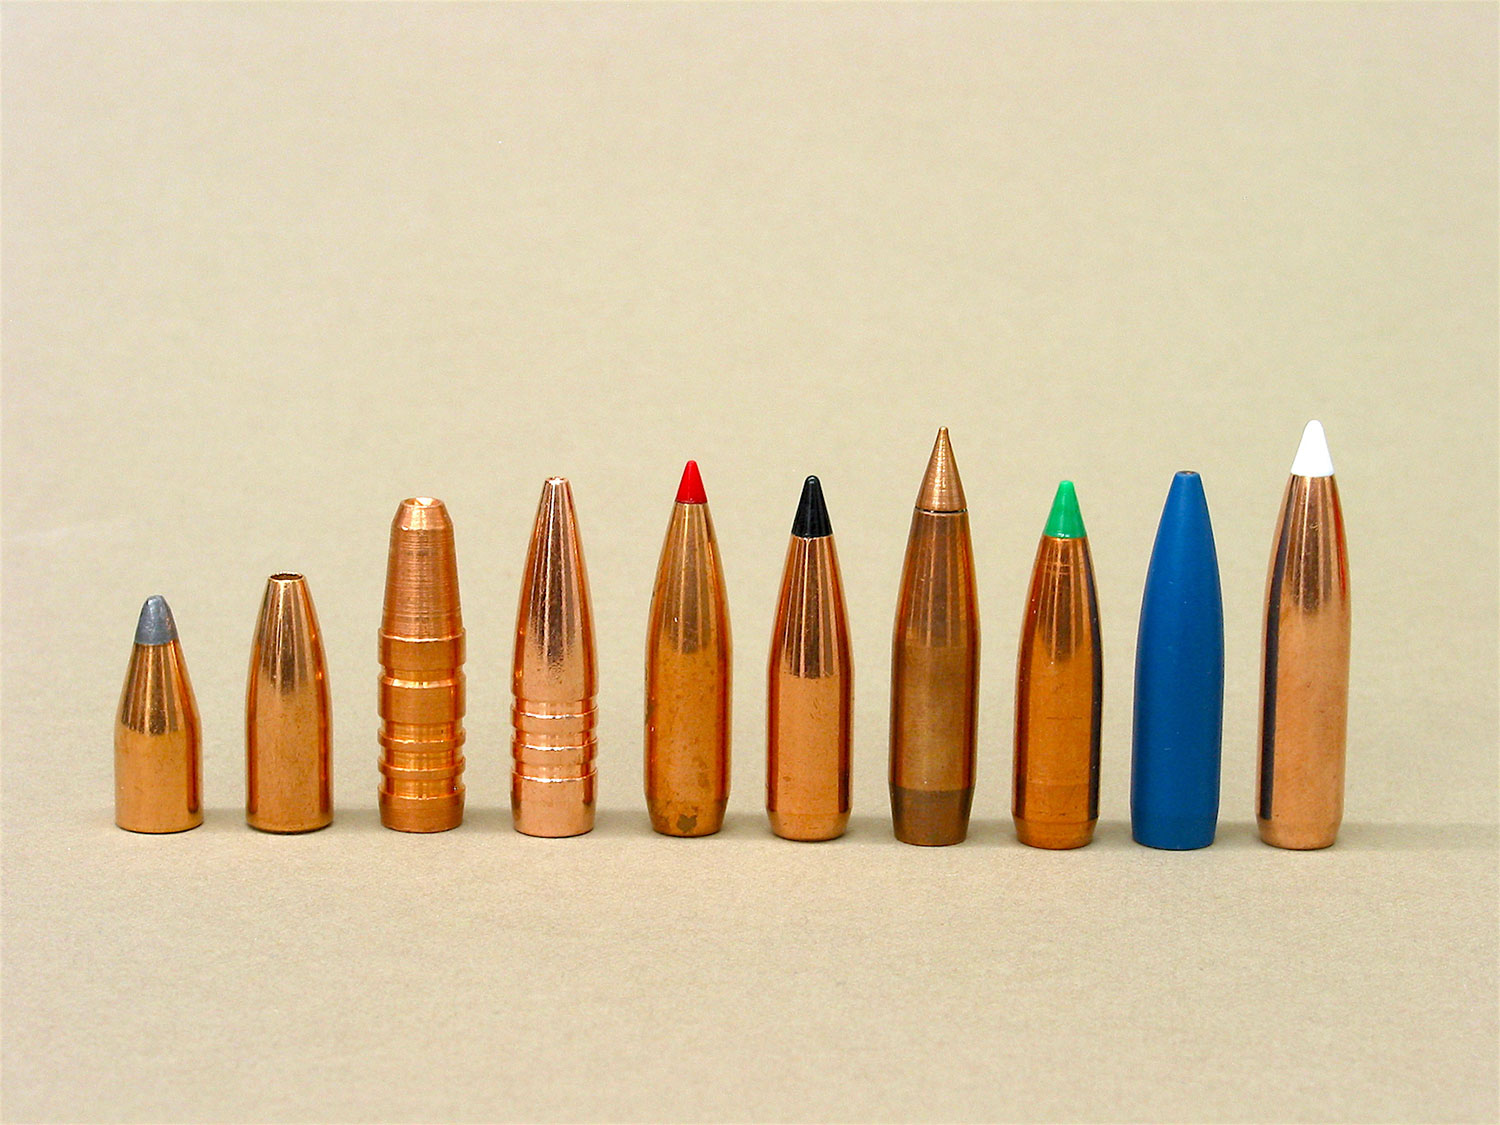 bullets lined up on tan background